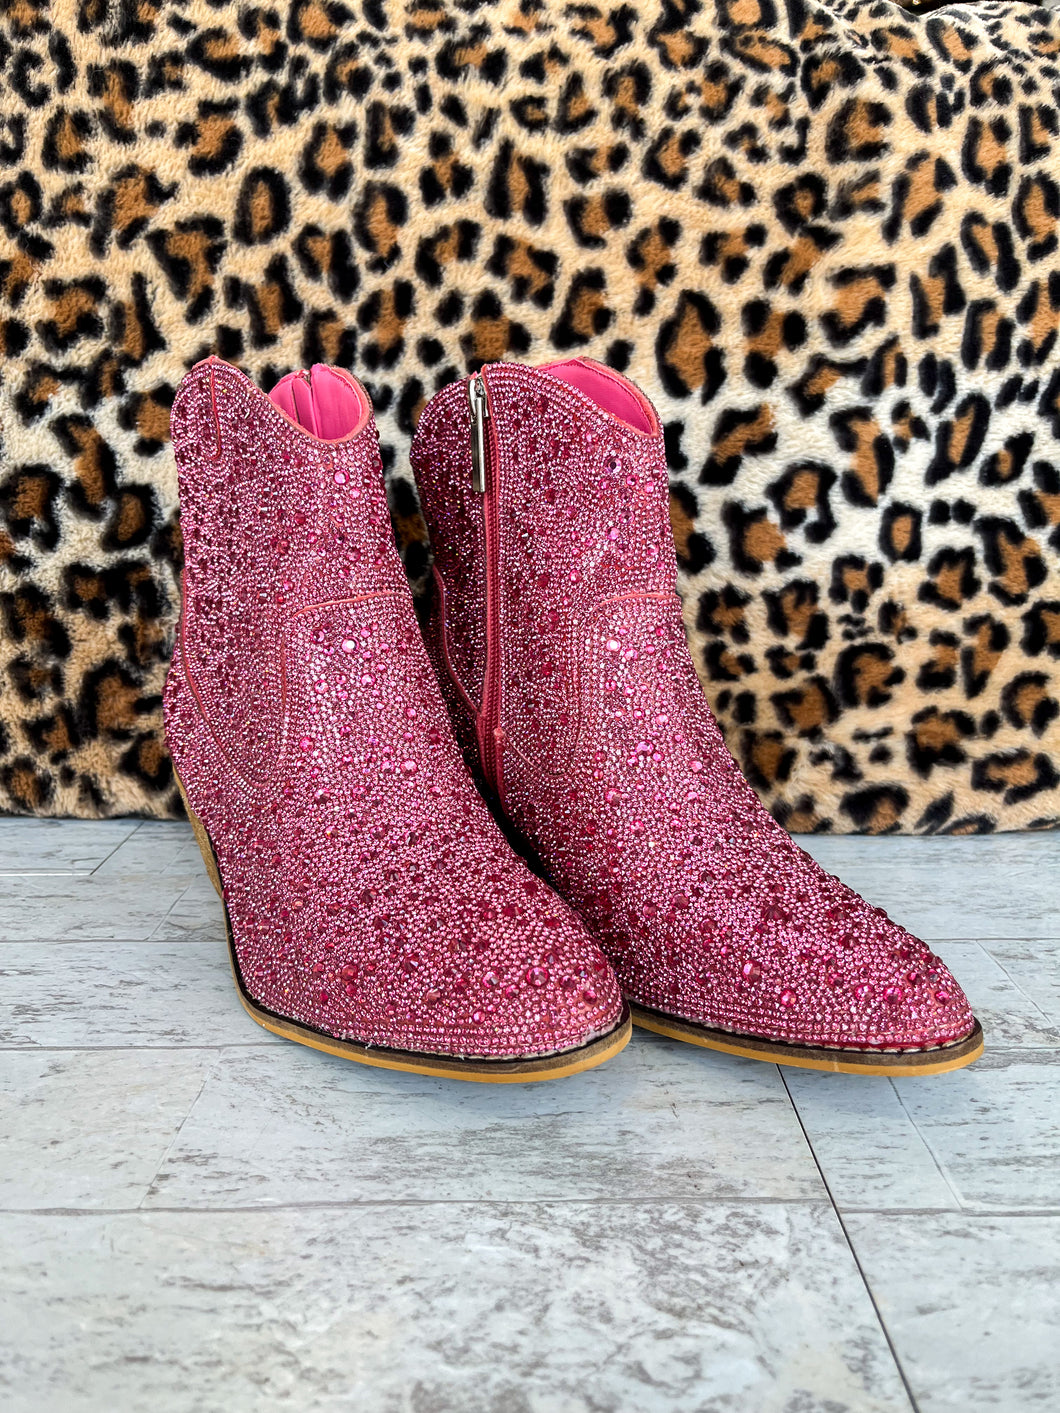 Shine Bright Pink Booties